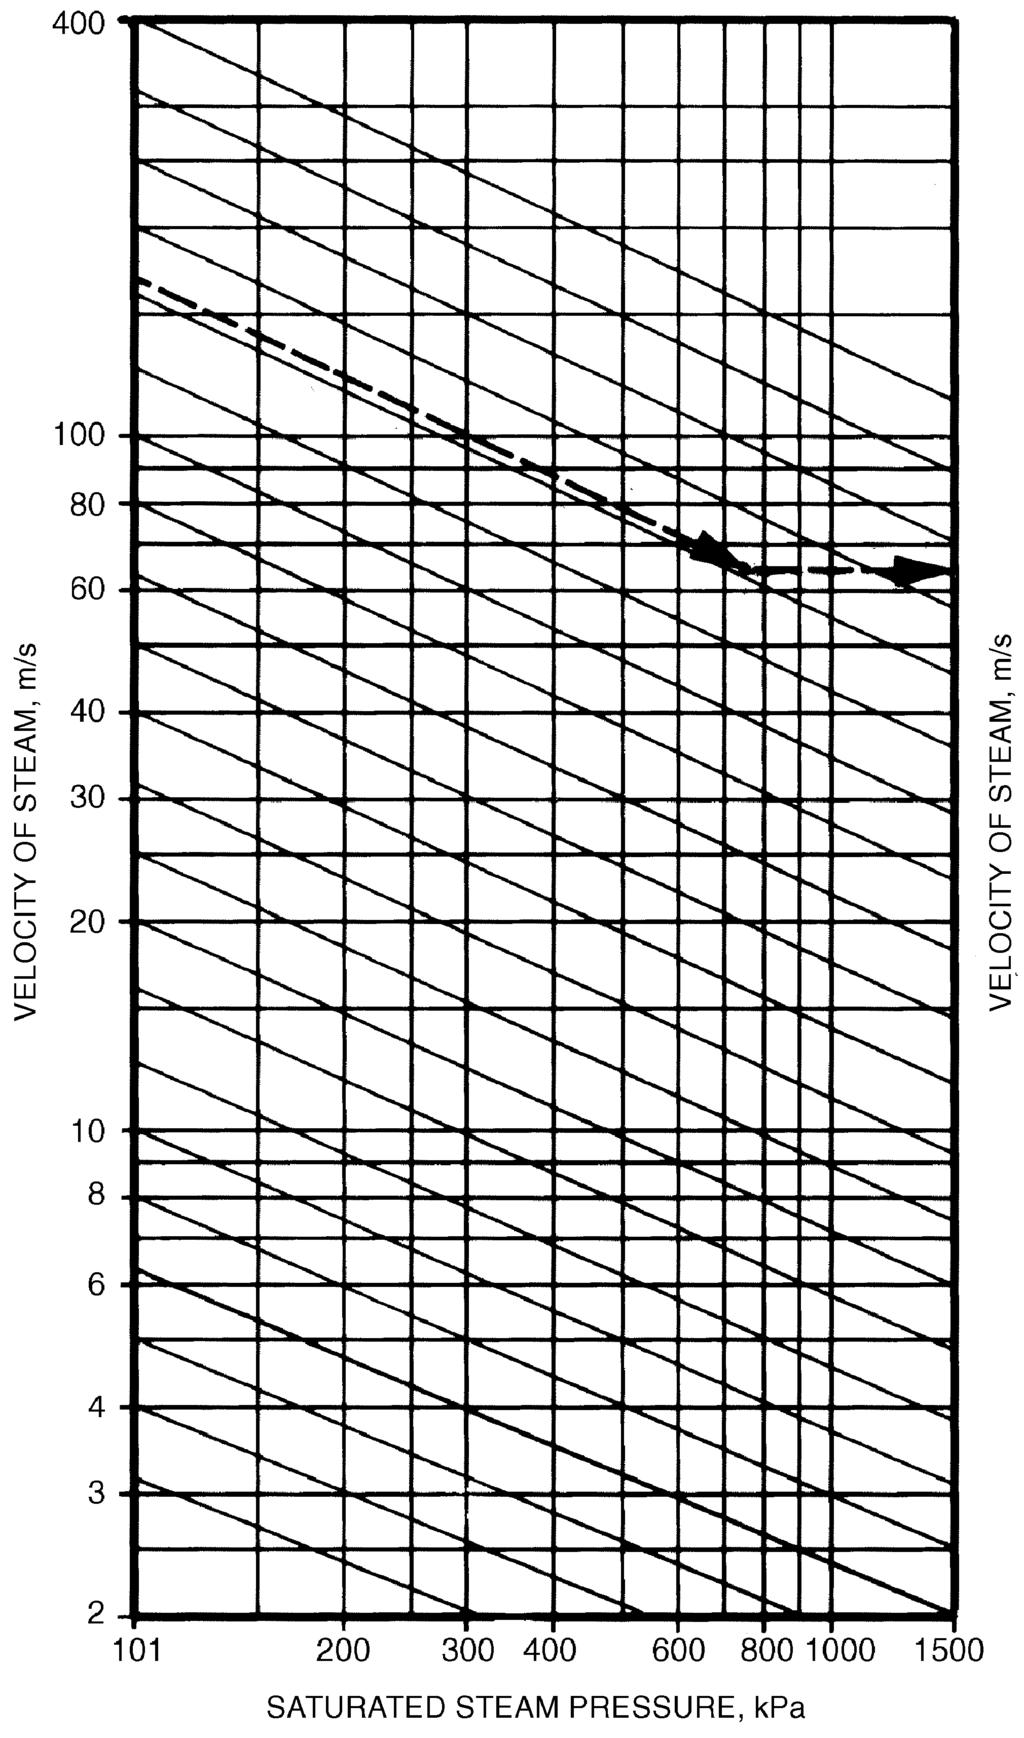 33.12 1997 ASHRAE Fundamentals Handbook (SI) LOW-PRESSURE STEAM PIPING Values in Table 14 (taken from Figure 10) provide a more rapid means of selecting pipe sizes for the various pressure drops